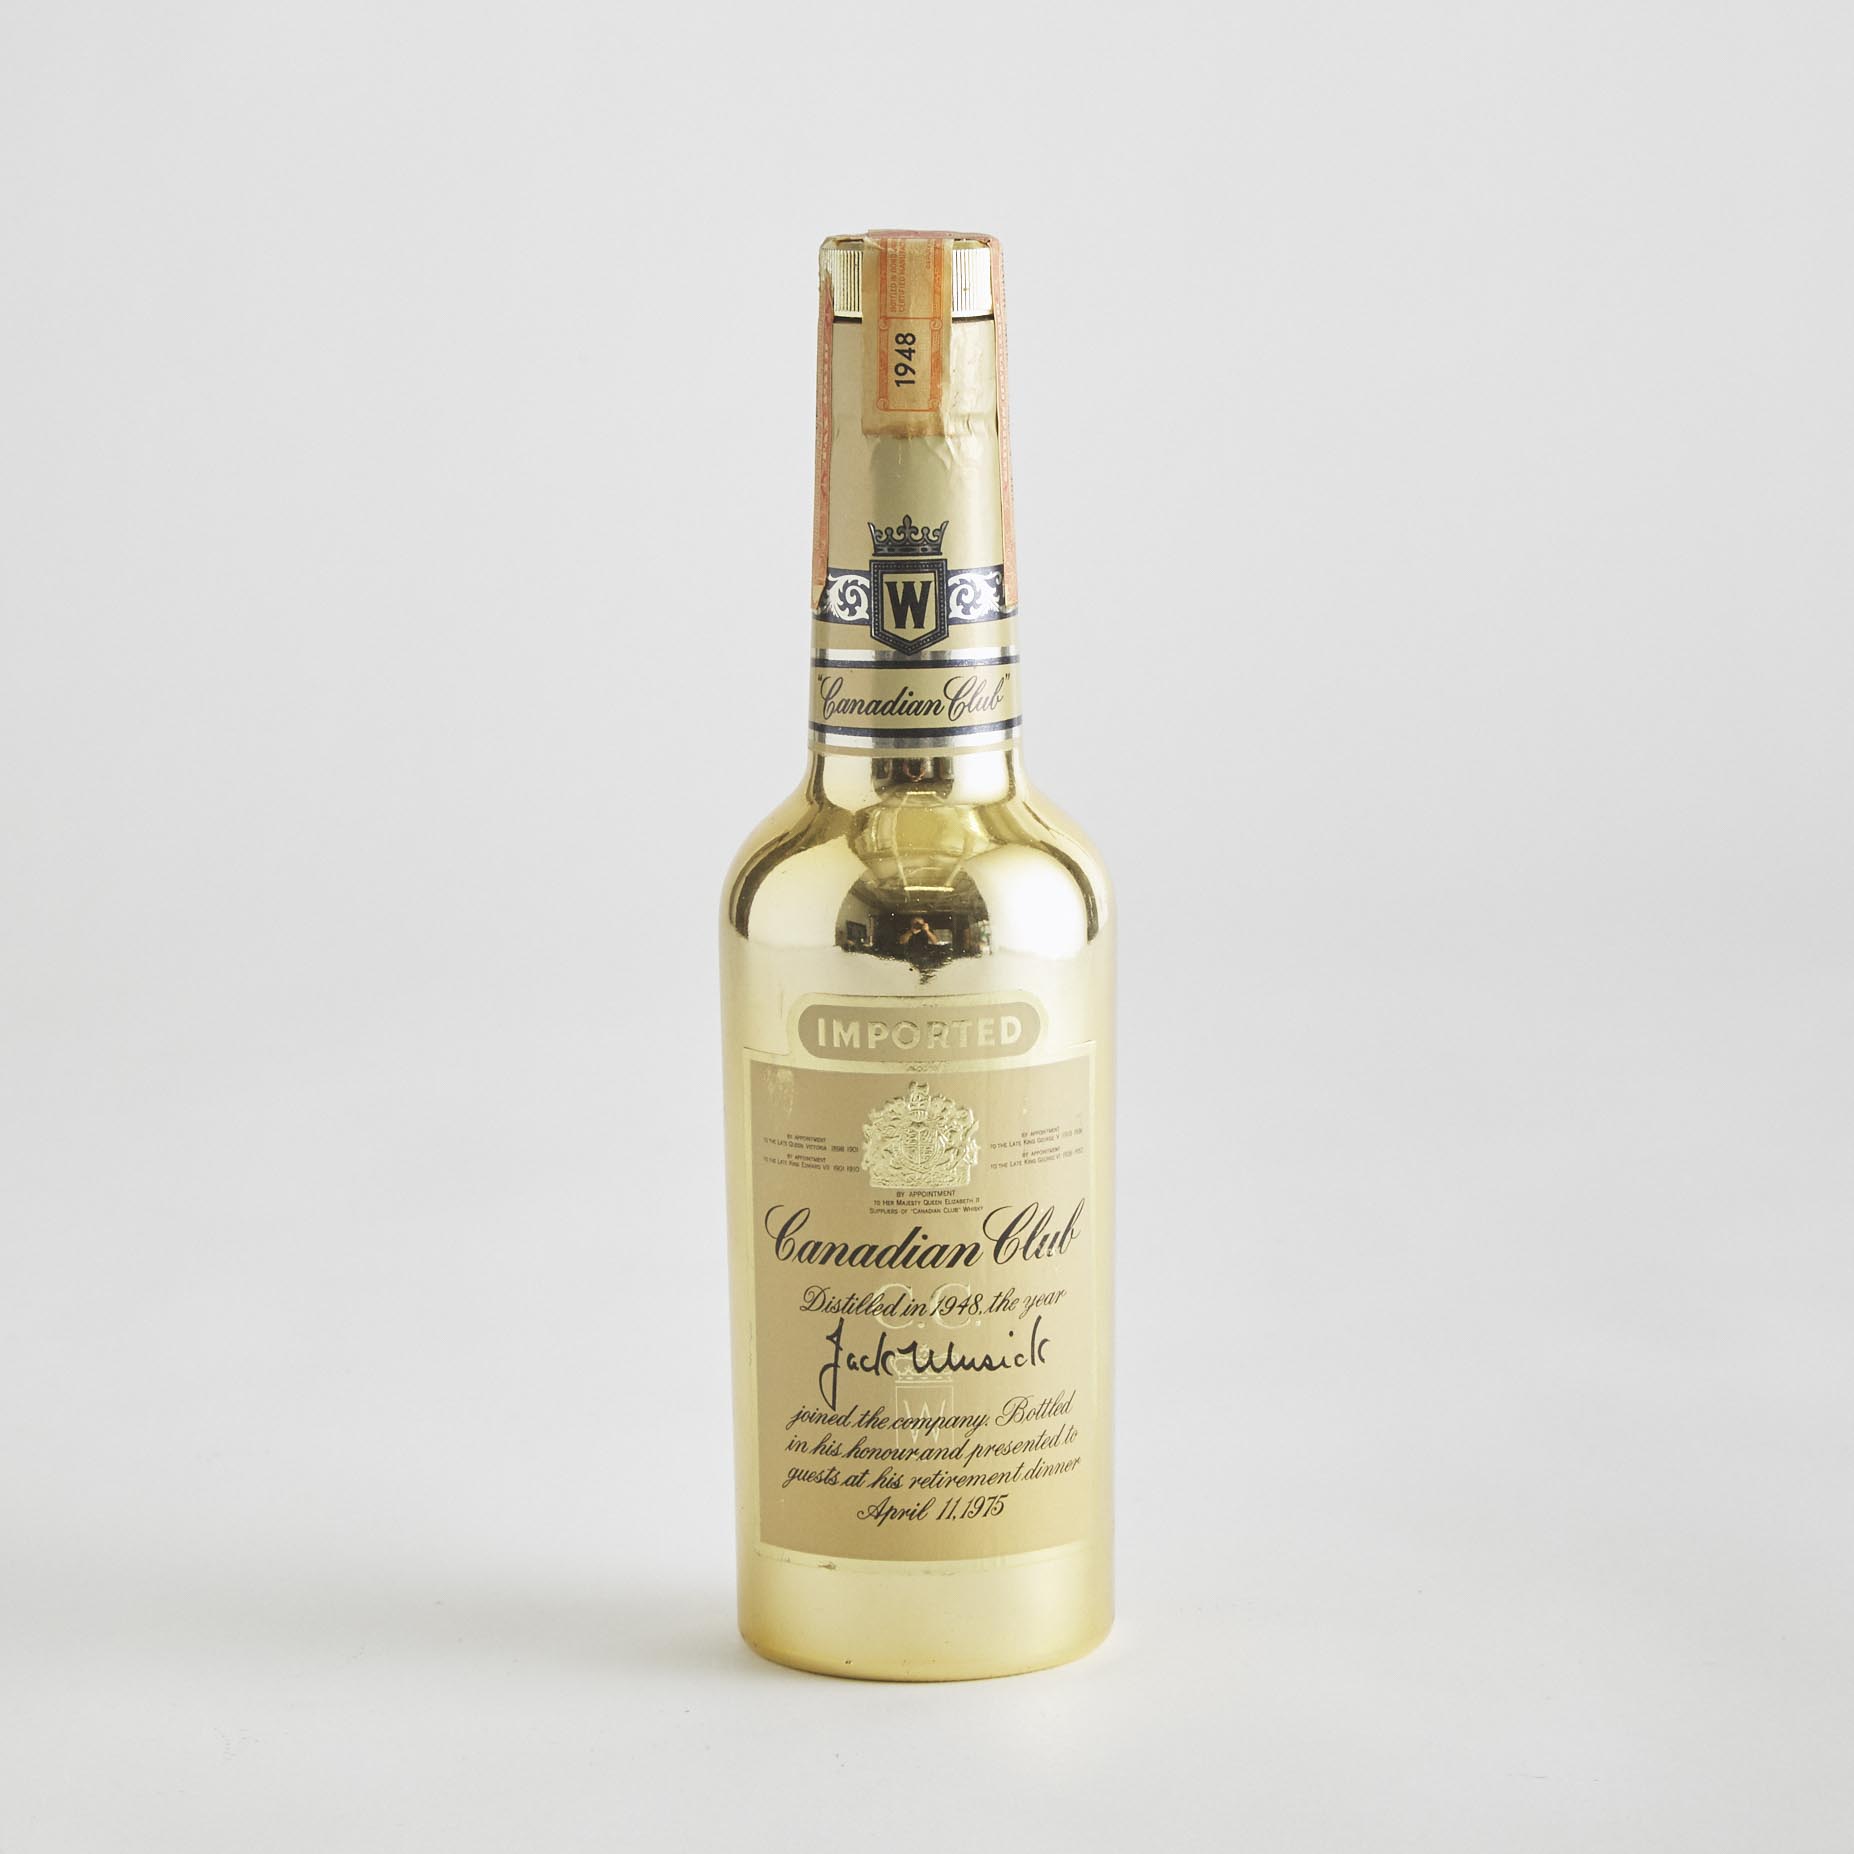 CANADIAN CLUB CANADIAN WHISKY NAS (ONE 375 ML ?)